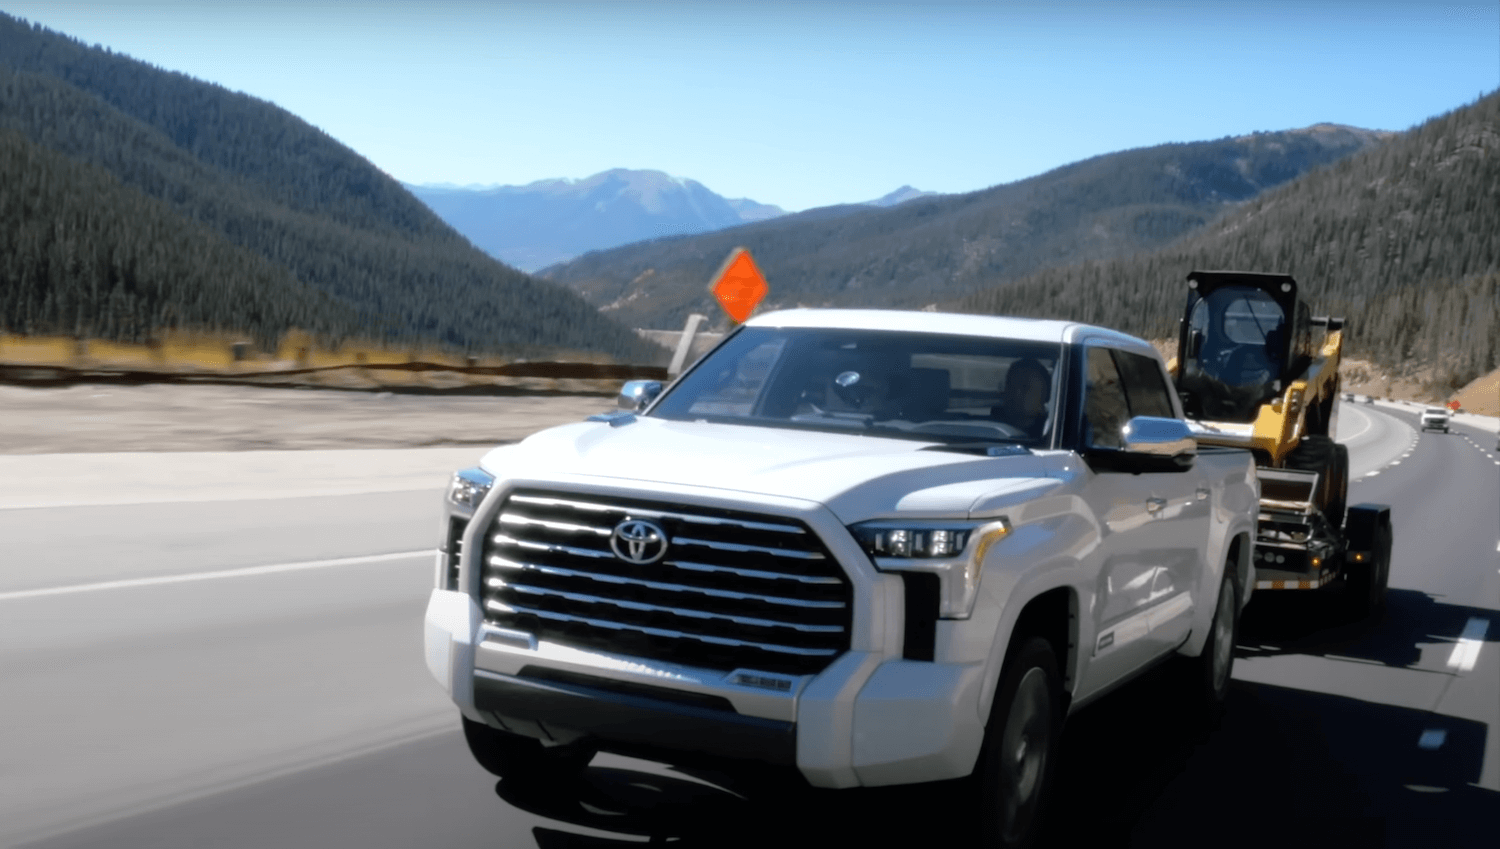 White V6 Toyota Tundra hybrid pickup truck pulls a trailer with a 10,000 skidsteer up the Rockies to test its towing mileage, mountains visible in the background.